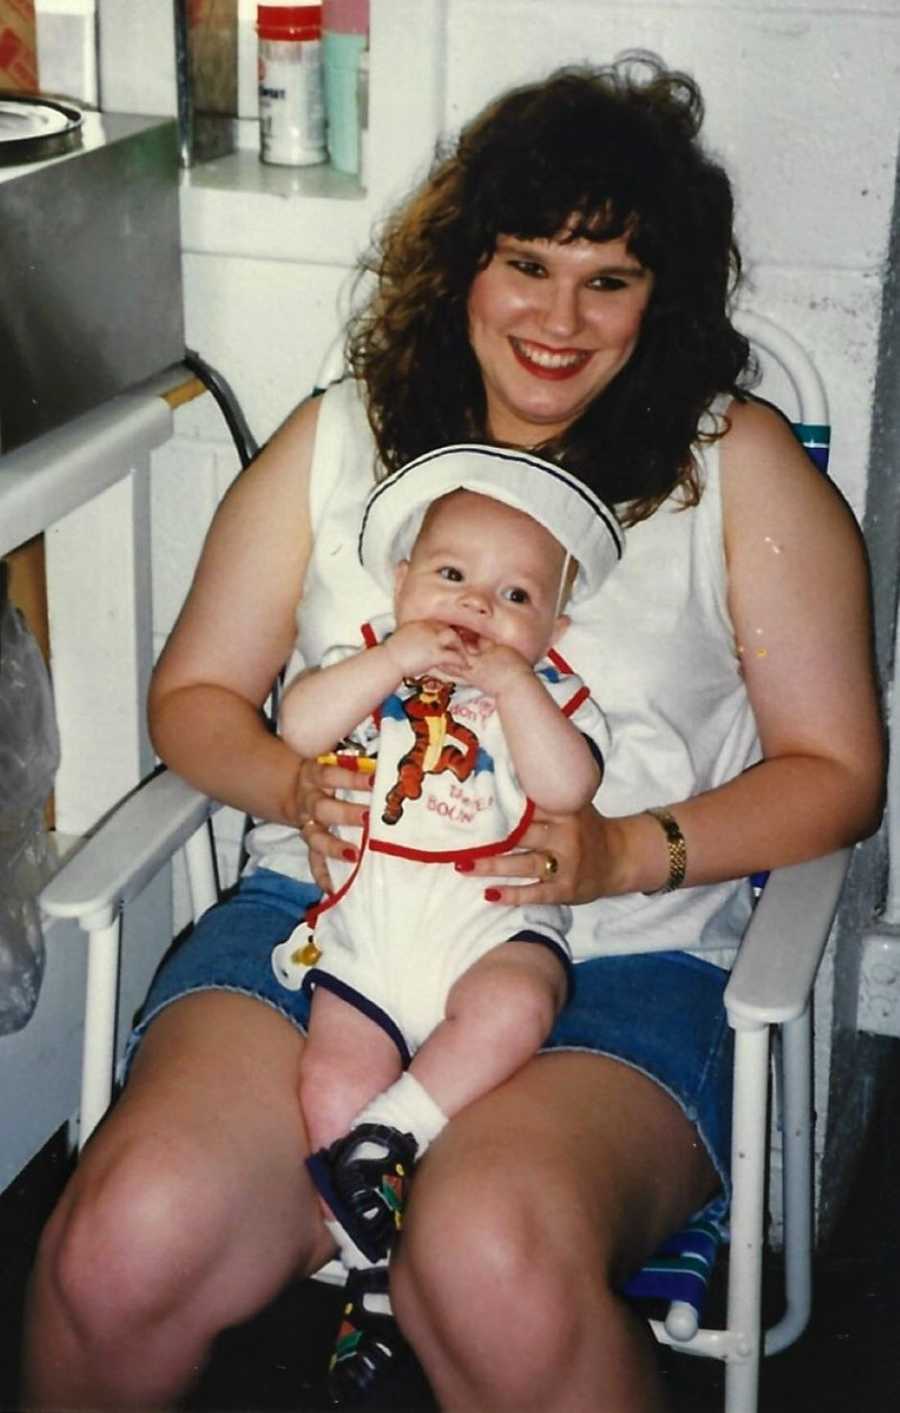 Mom smiles while holding her first son in a hat and onesie